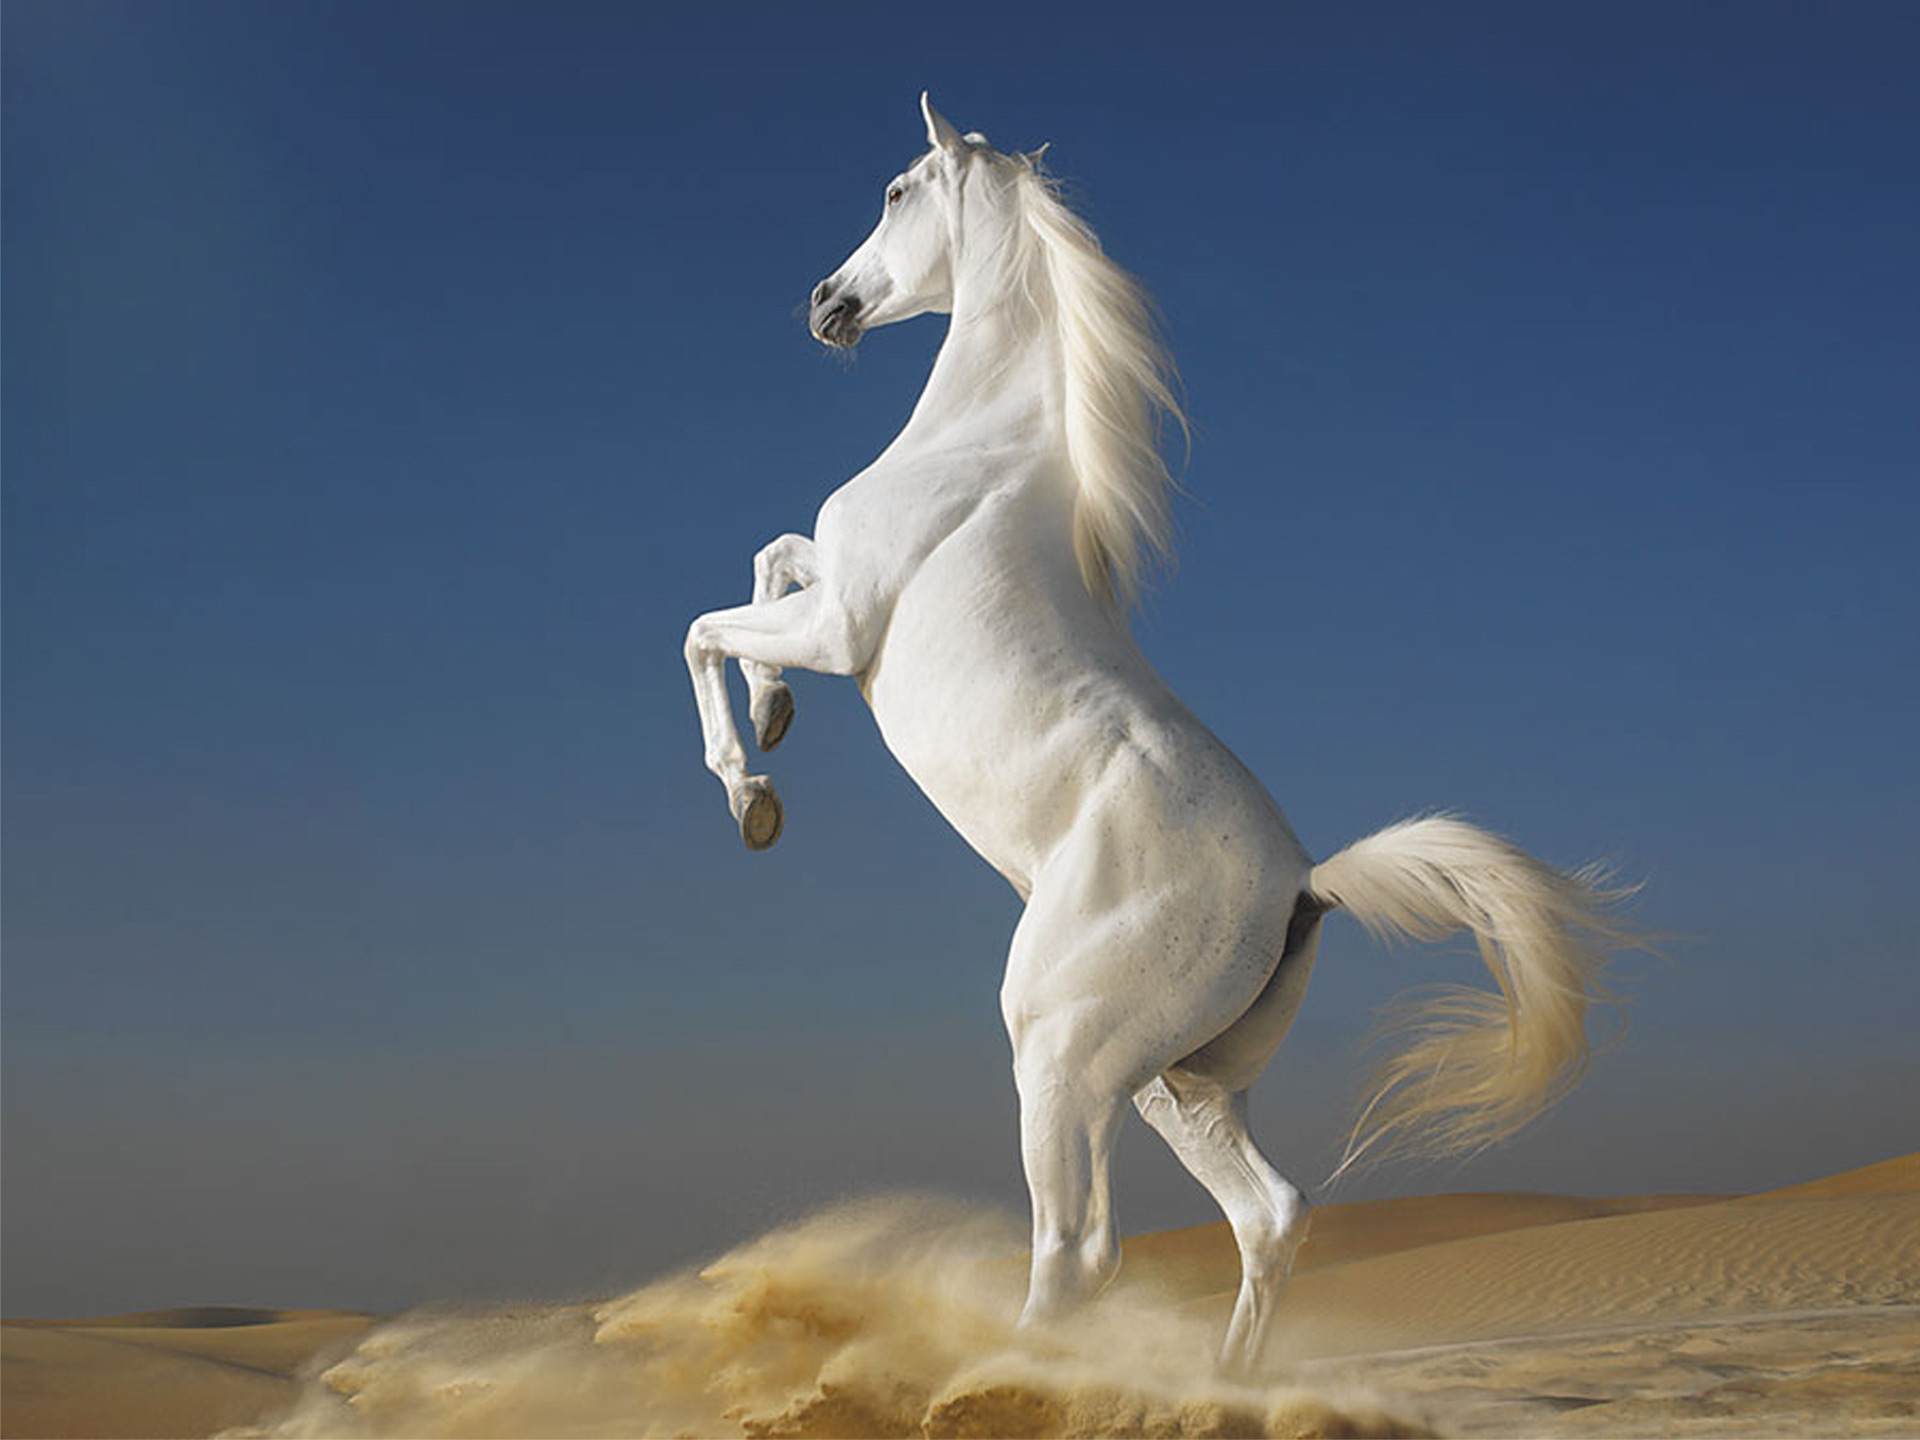  Horse best computer backgrounds Desktop hd Wallpaper and make this